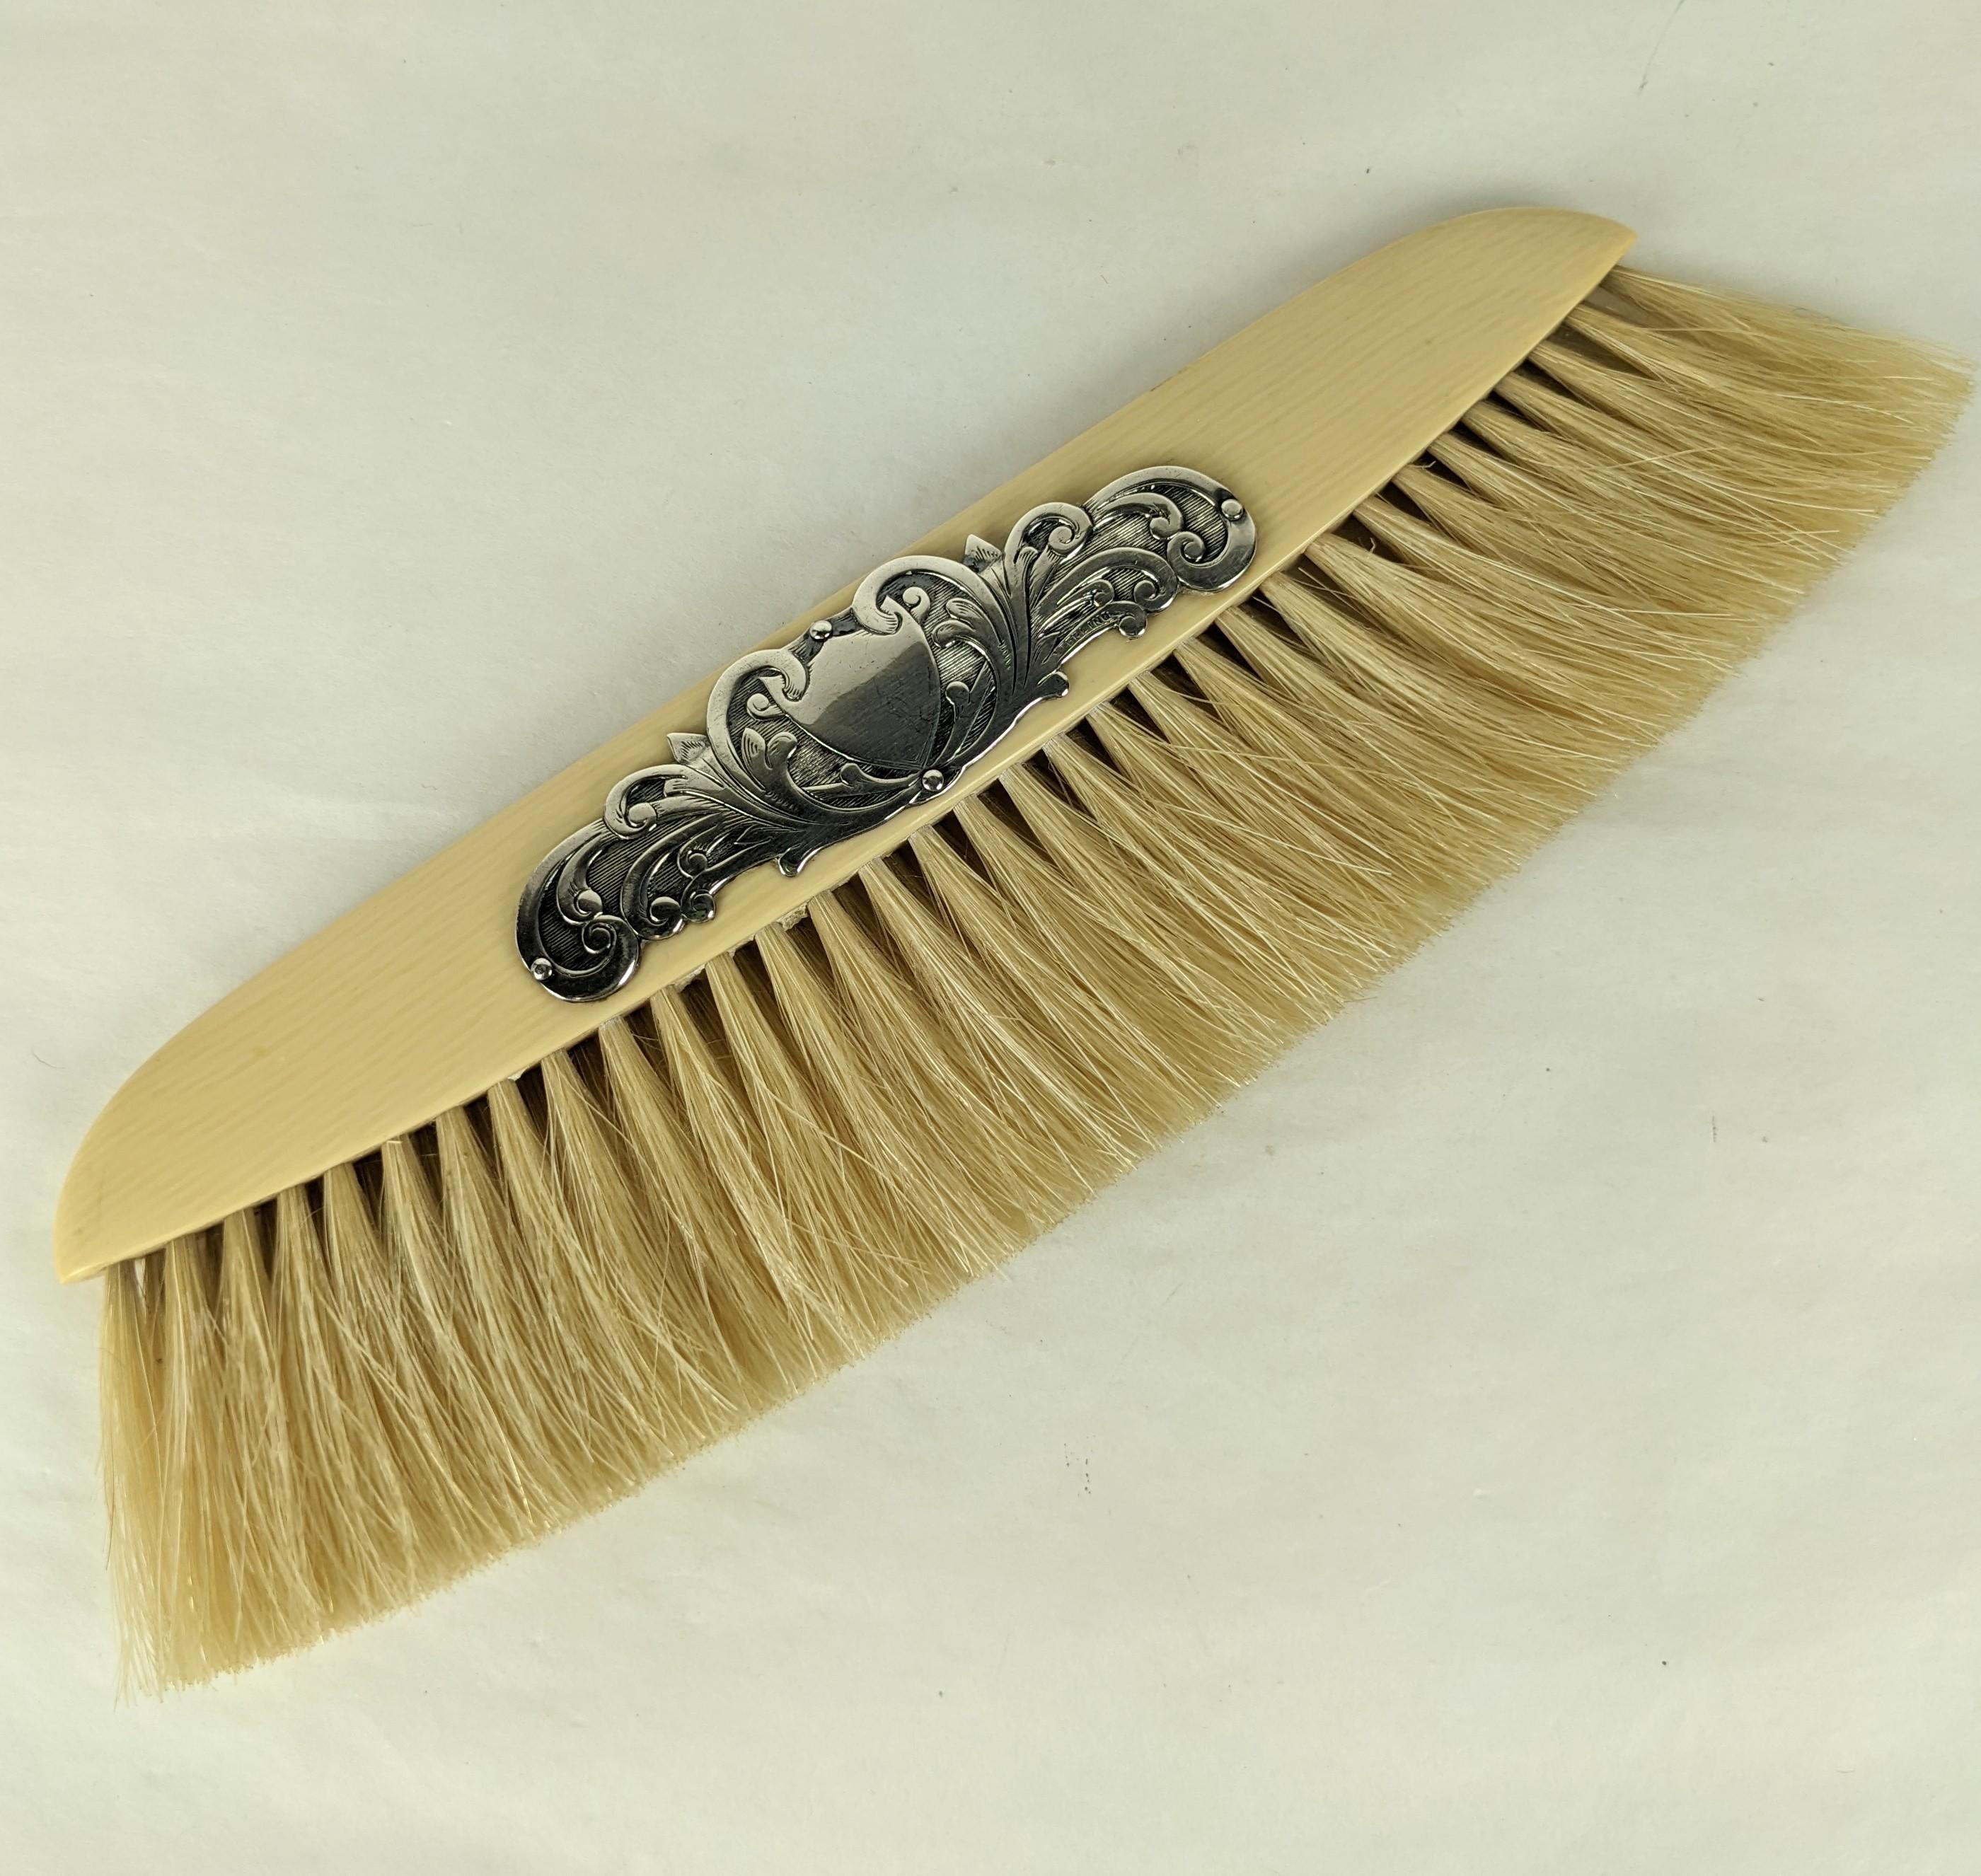 Edwardian table crumb brush from the early 20th century. Set with an elaborate central cartouche in sterling silver on a celluloid handle with natural bristles. 
Marked 